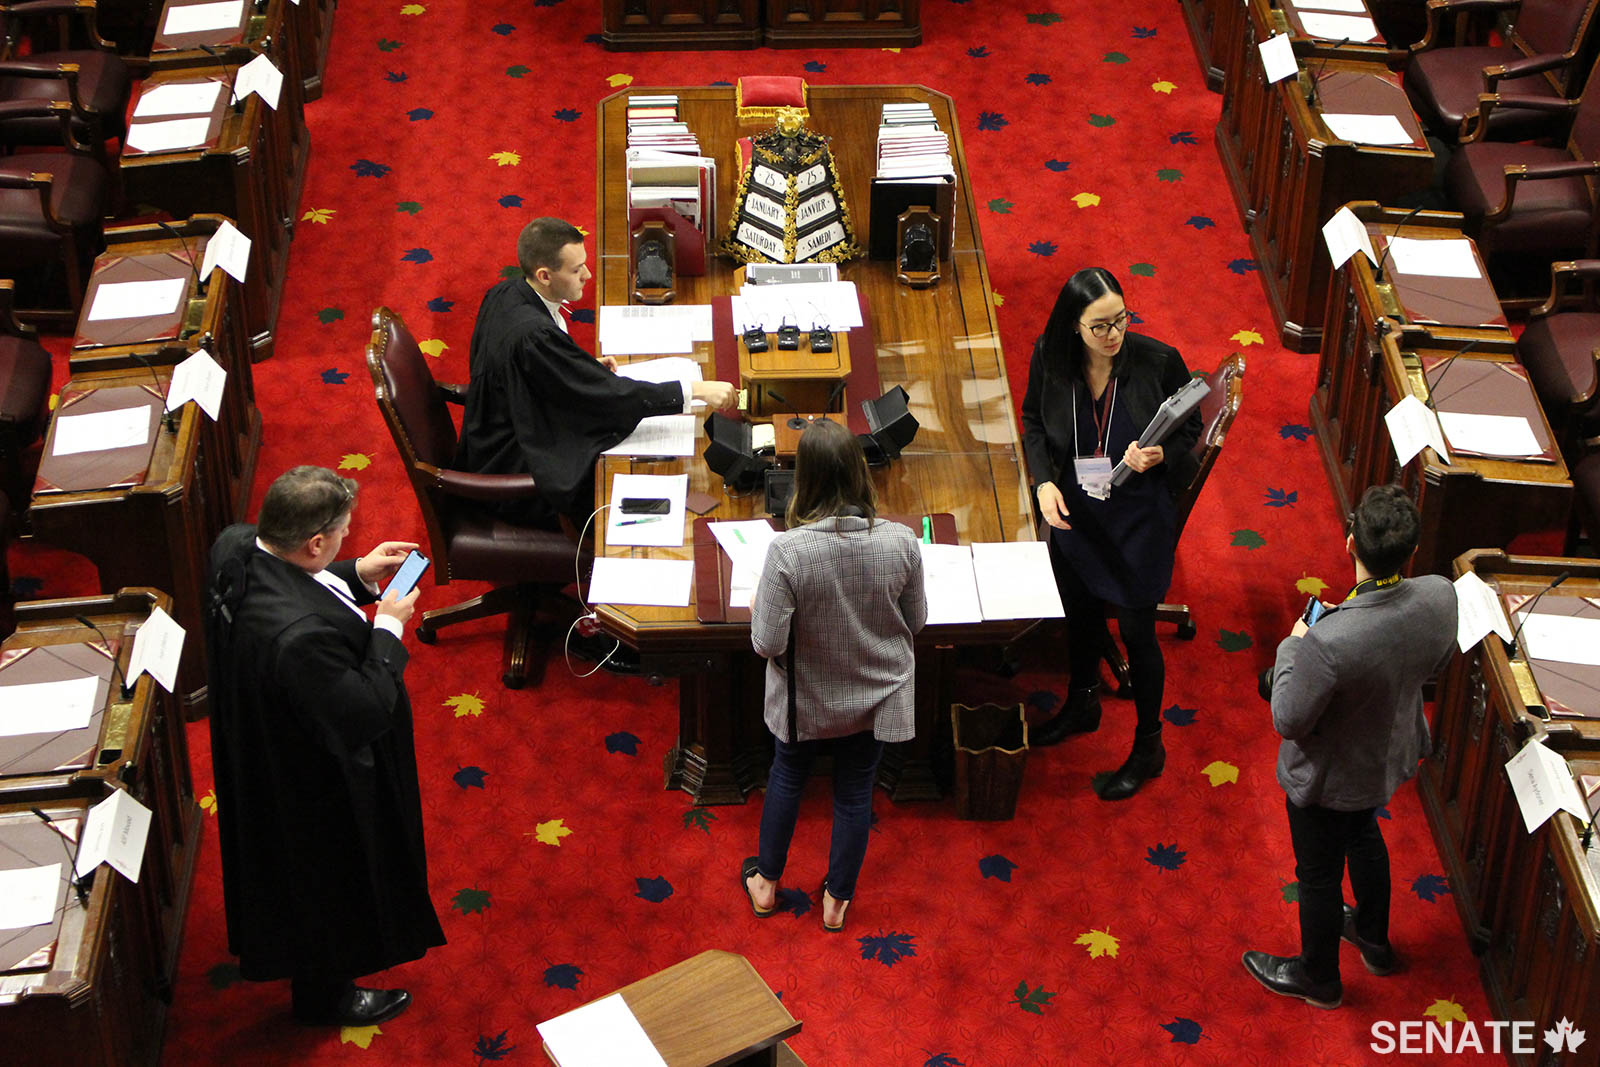 Senate staff make final arrangements as model senators prepare to take over the Red Chamber at the first-ever Model Senate, which took place on January 25 and 26, 2020.